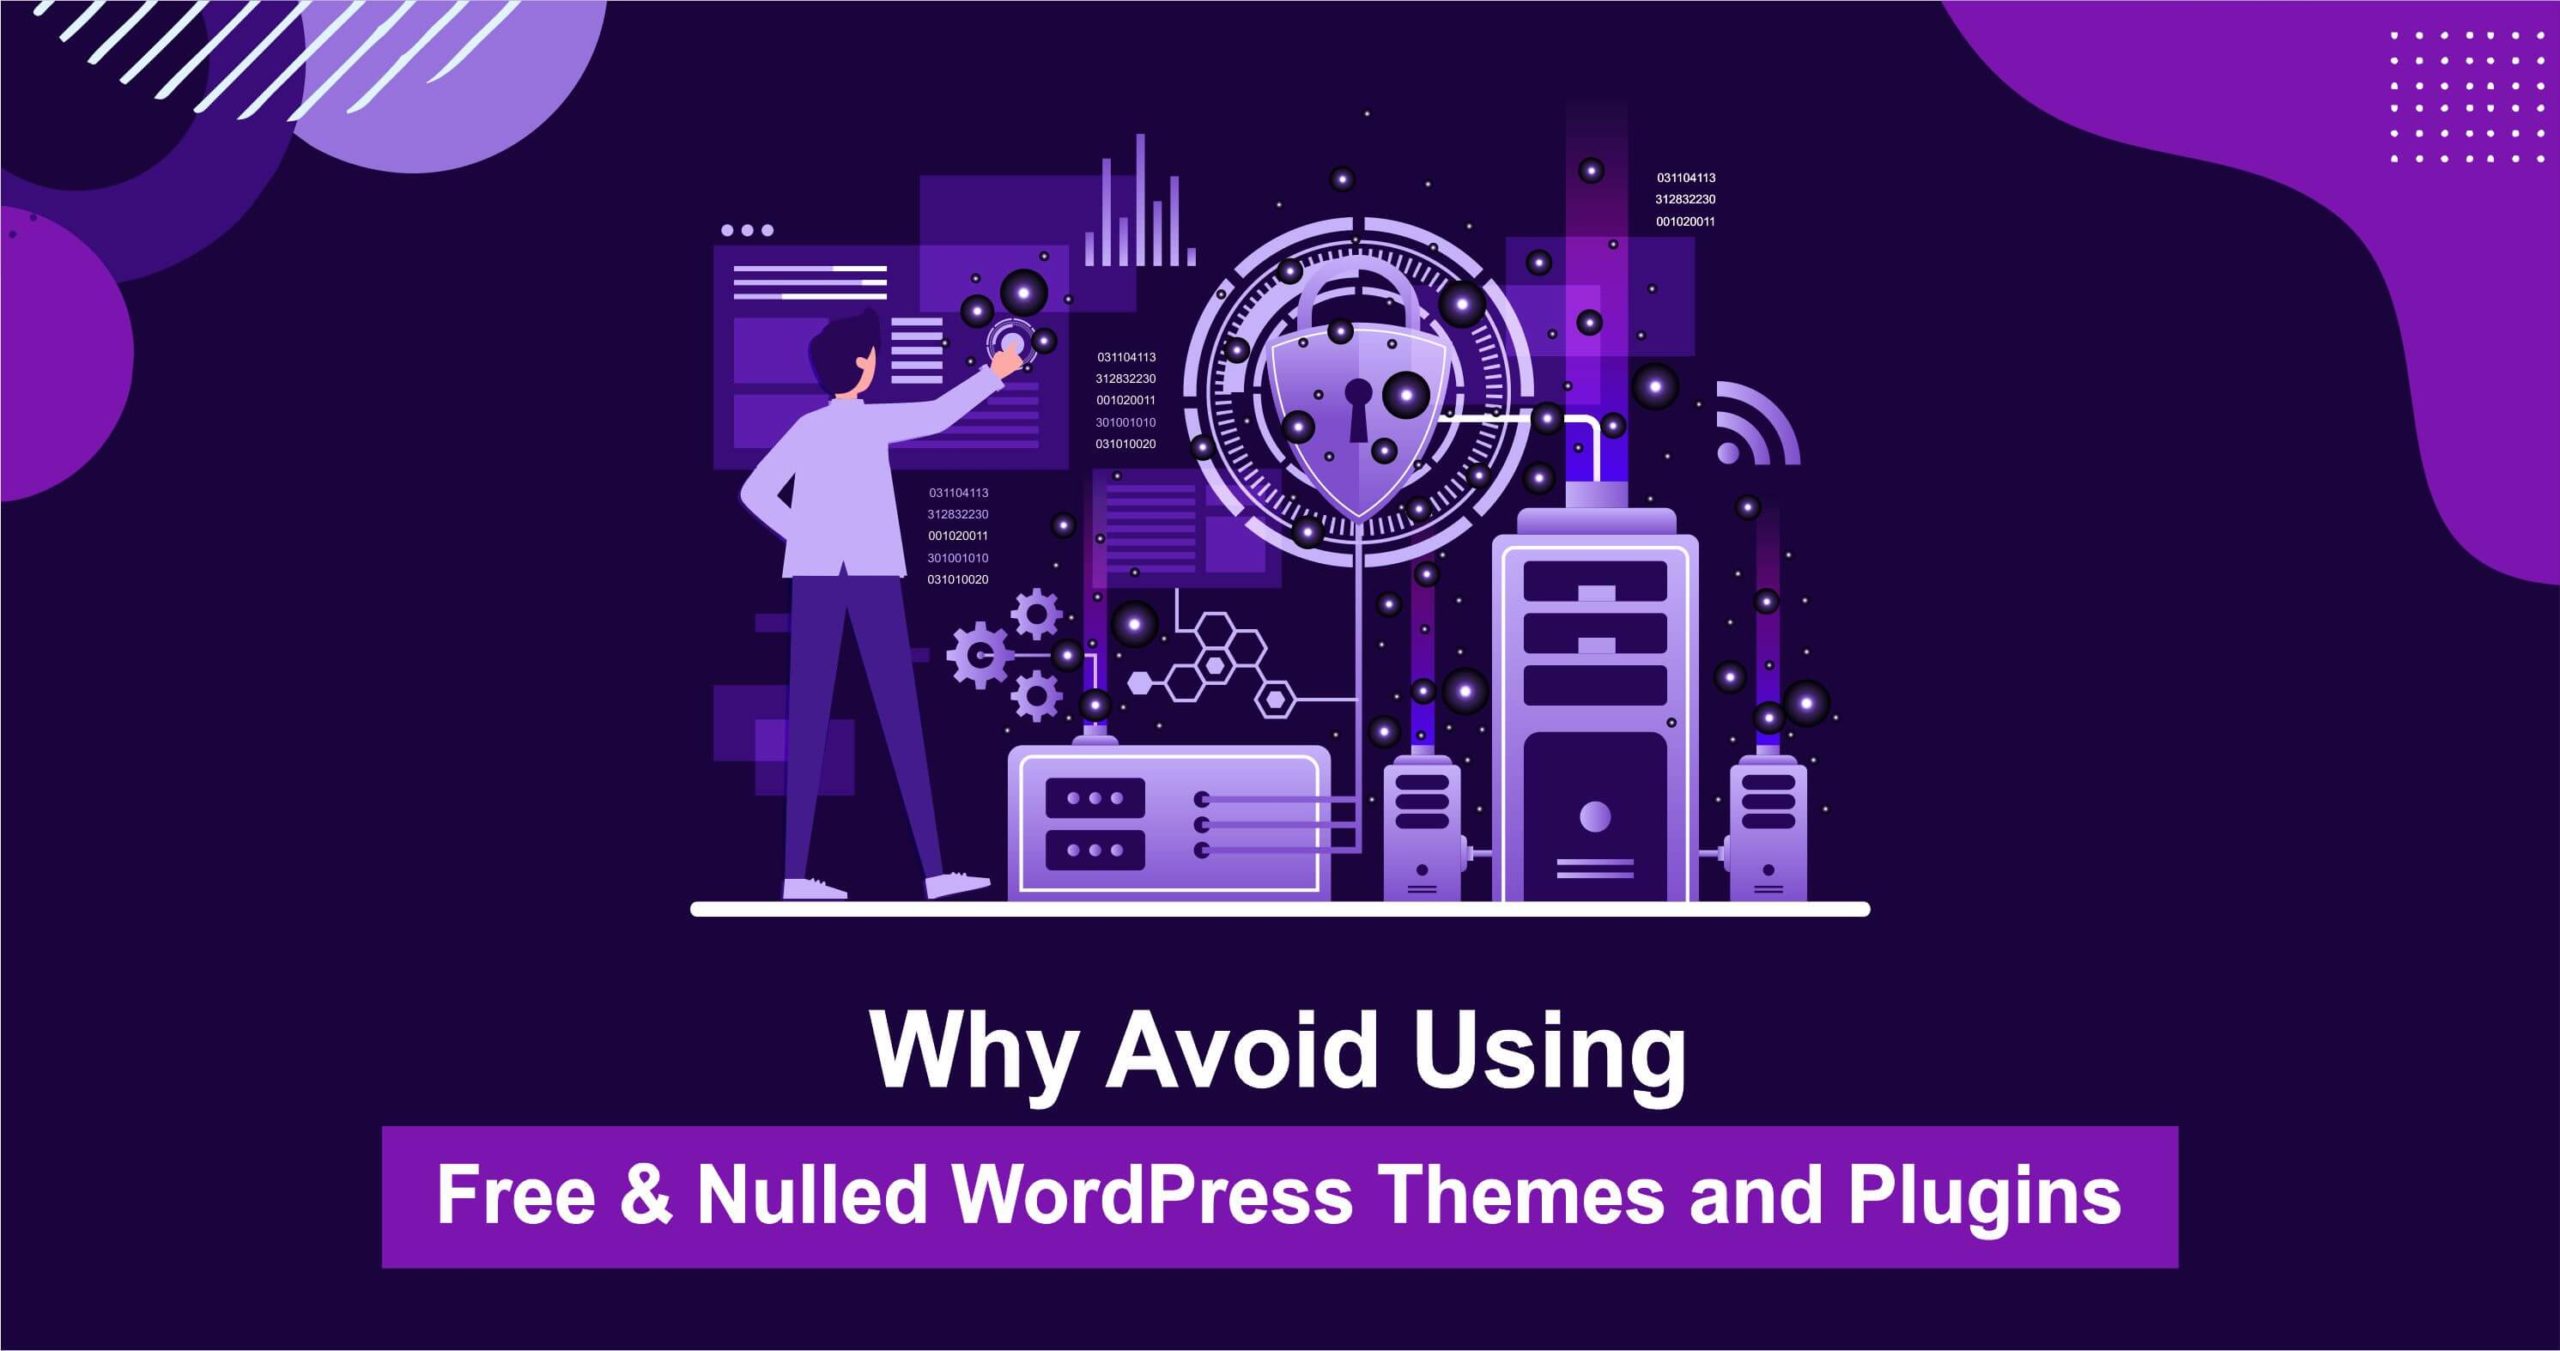 Free & Nulled WordPress Themes and Plugins